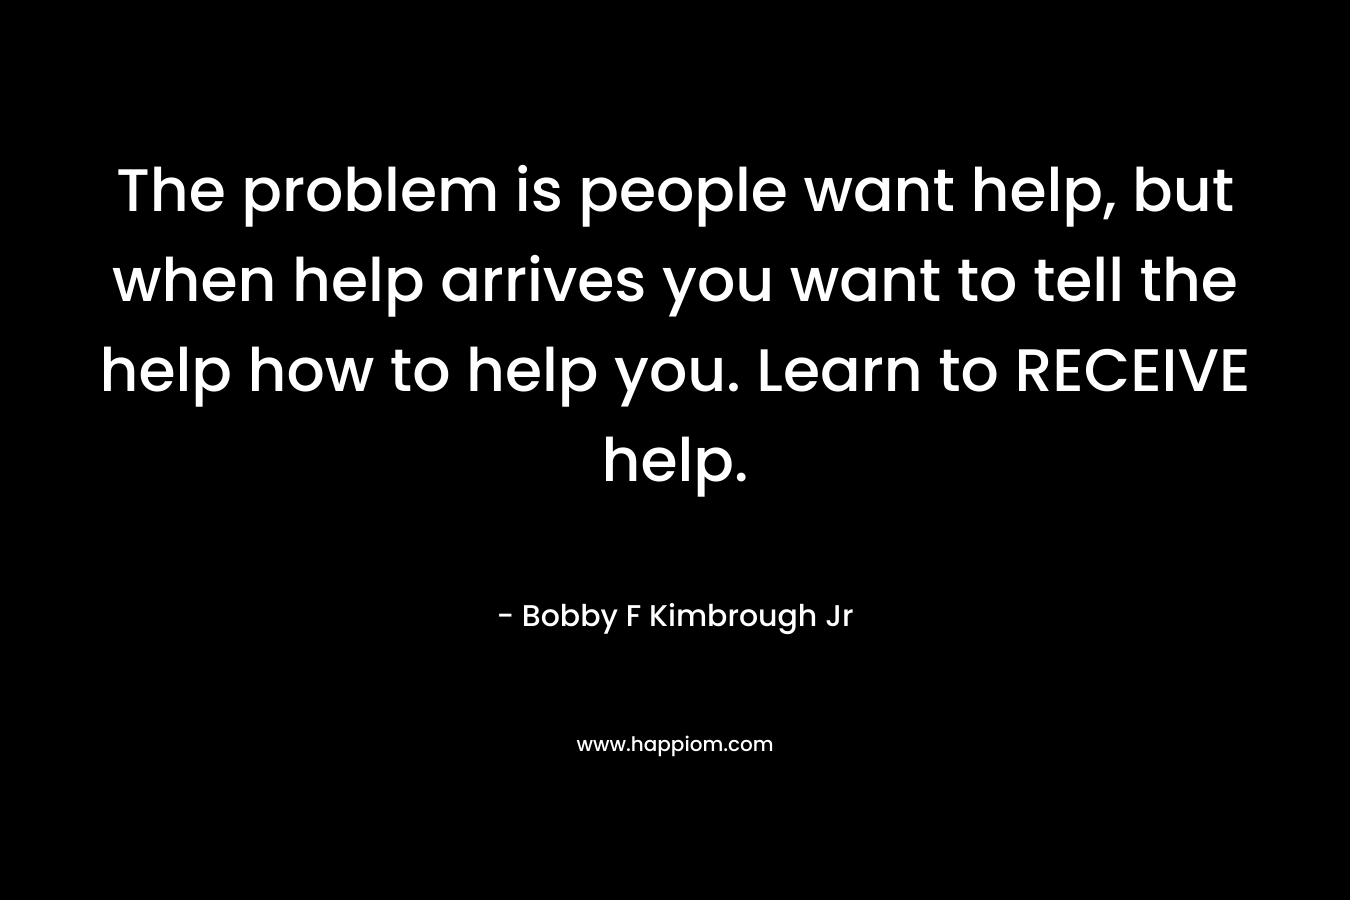 The problem is people want help, but when help arrives you want to tell the help how to help you. Learn to RECEIVE help. – Bobby F Kimbrough Jr